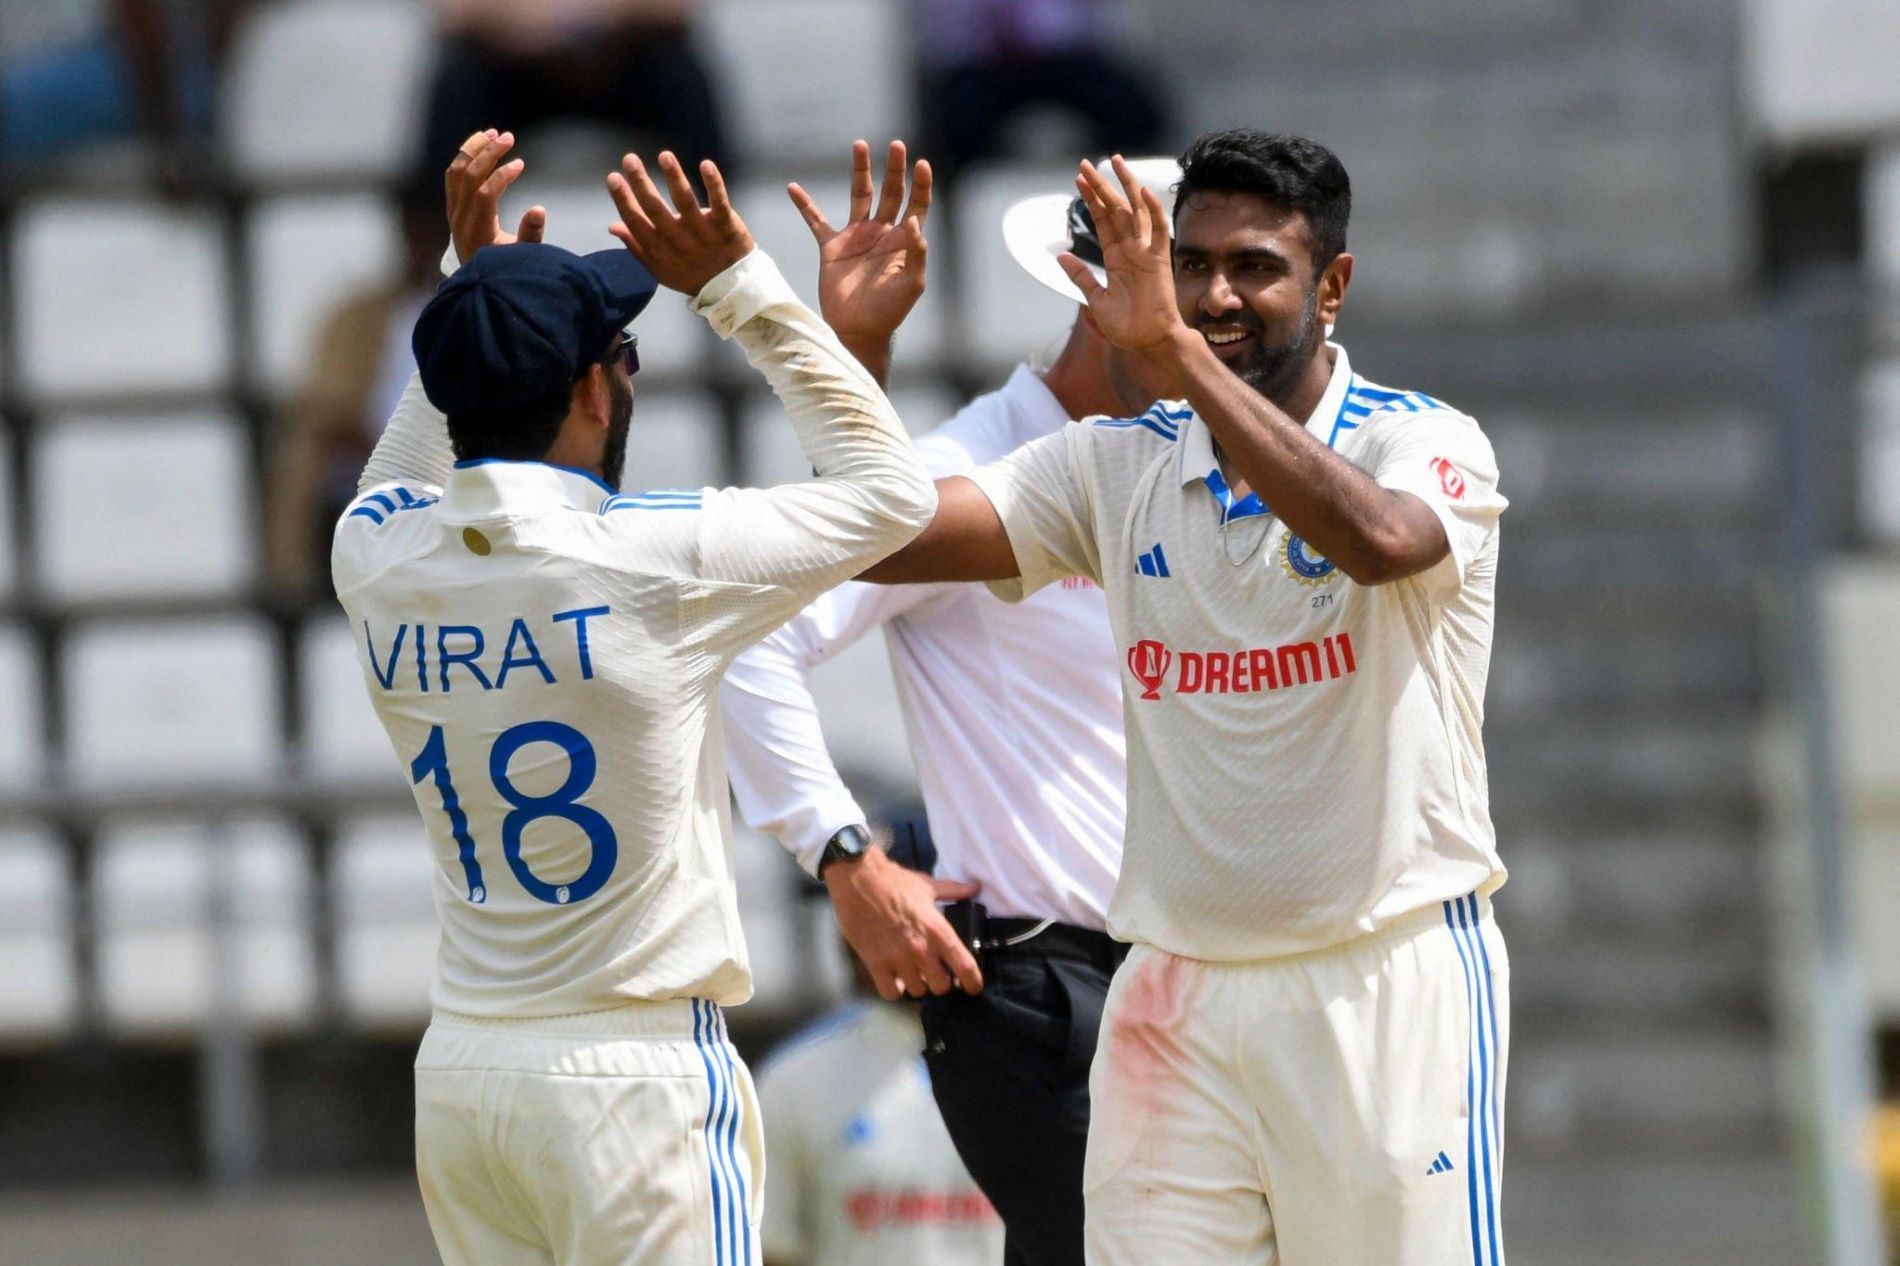 Ravi Ashwin bagged two wickets in the second innings to take India closer to victory.